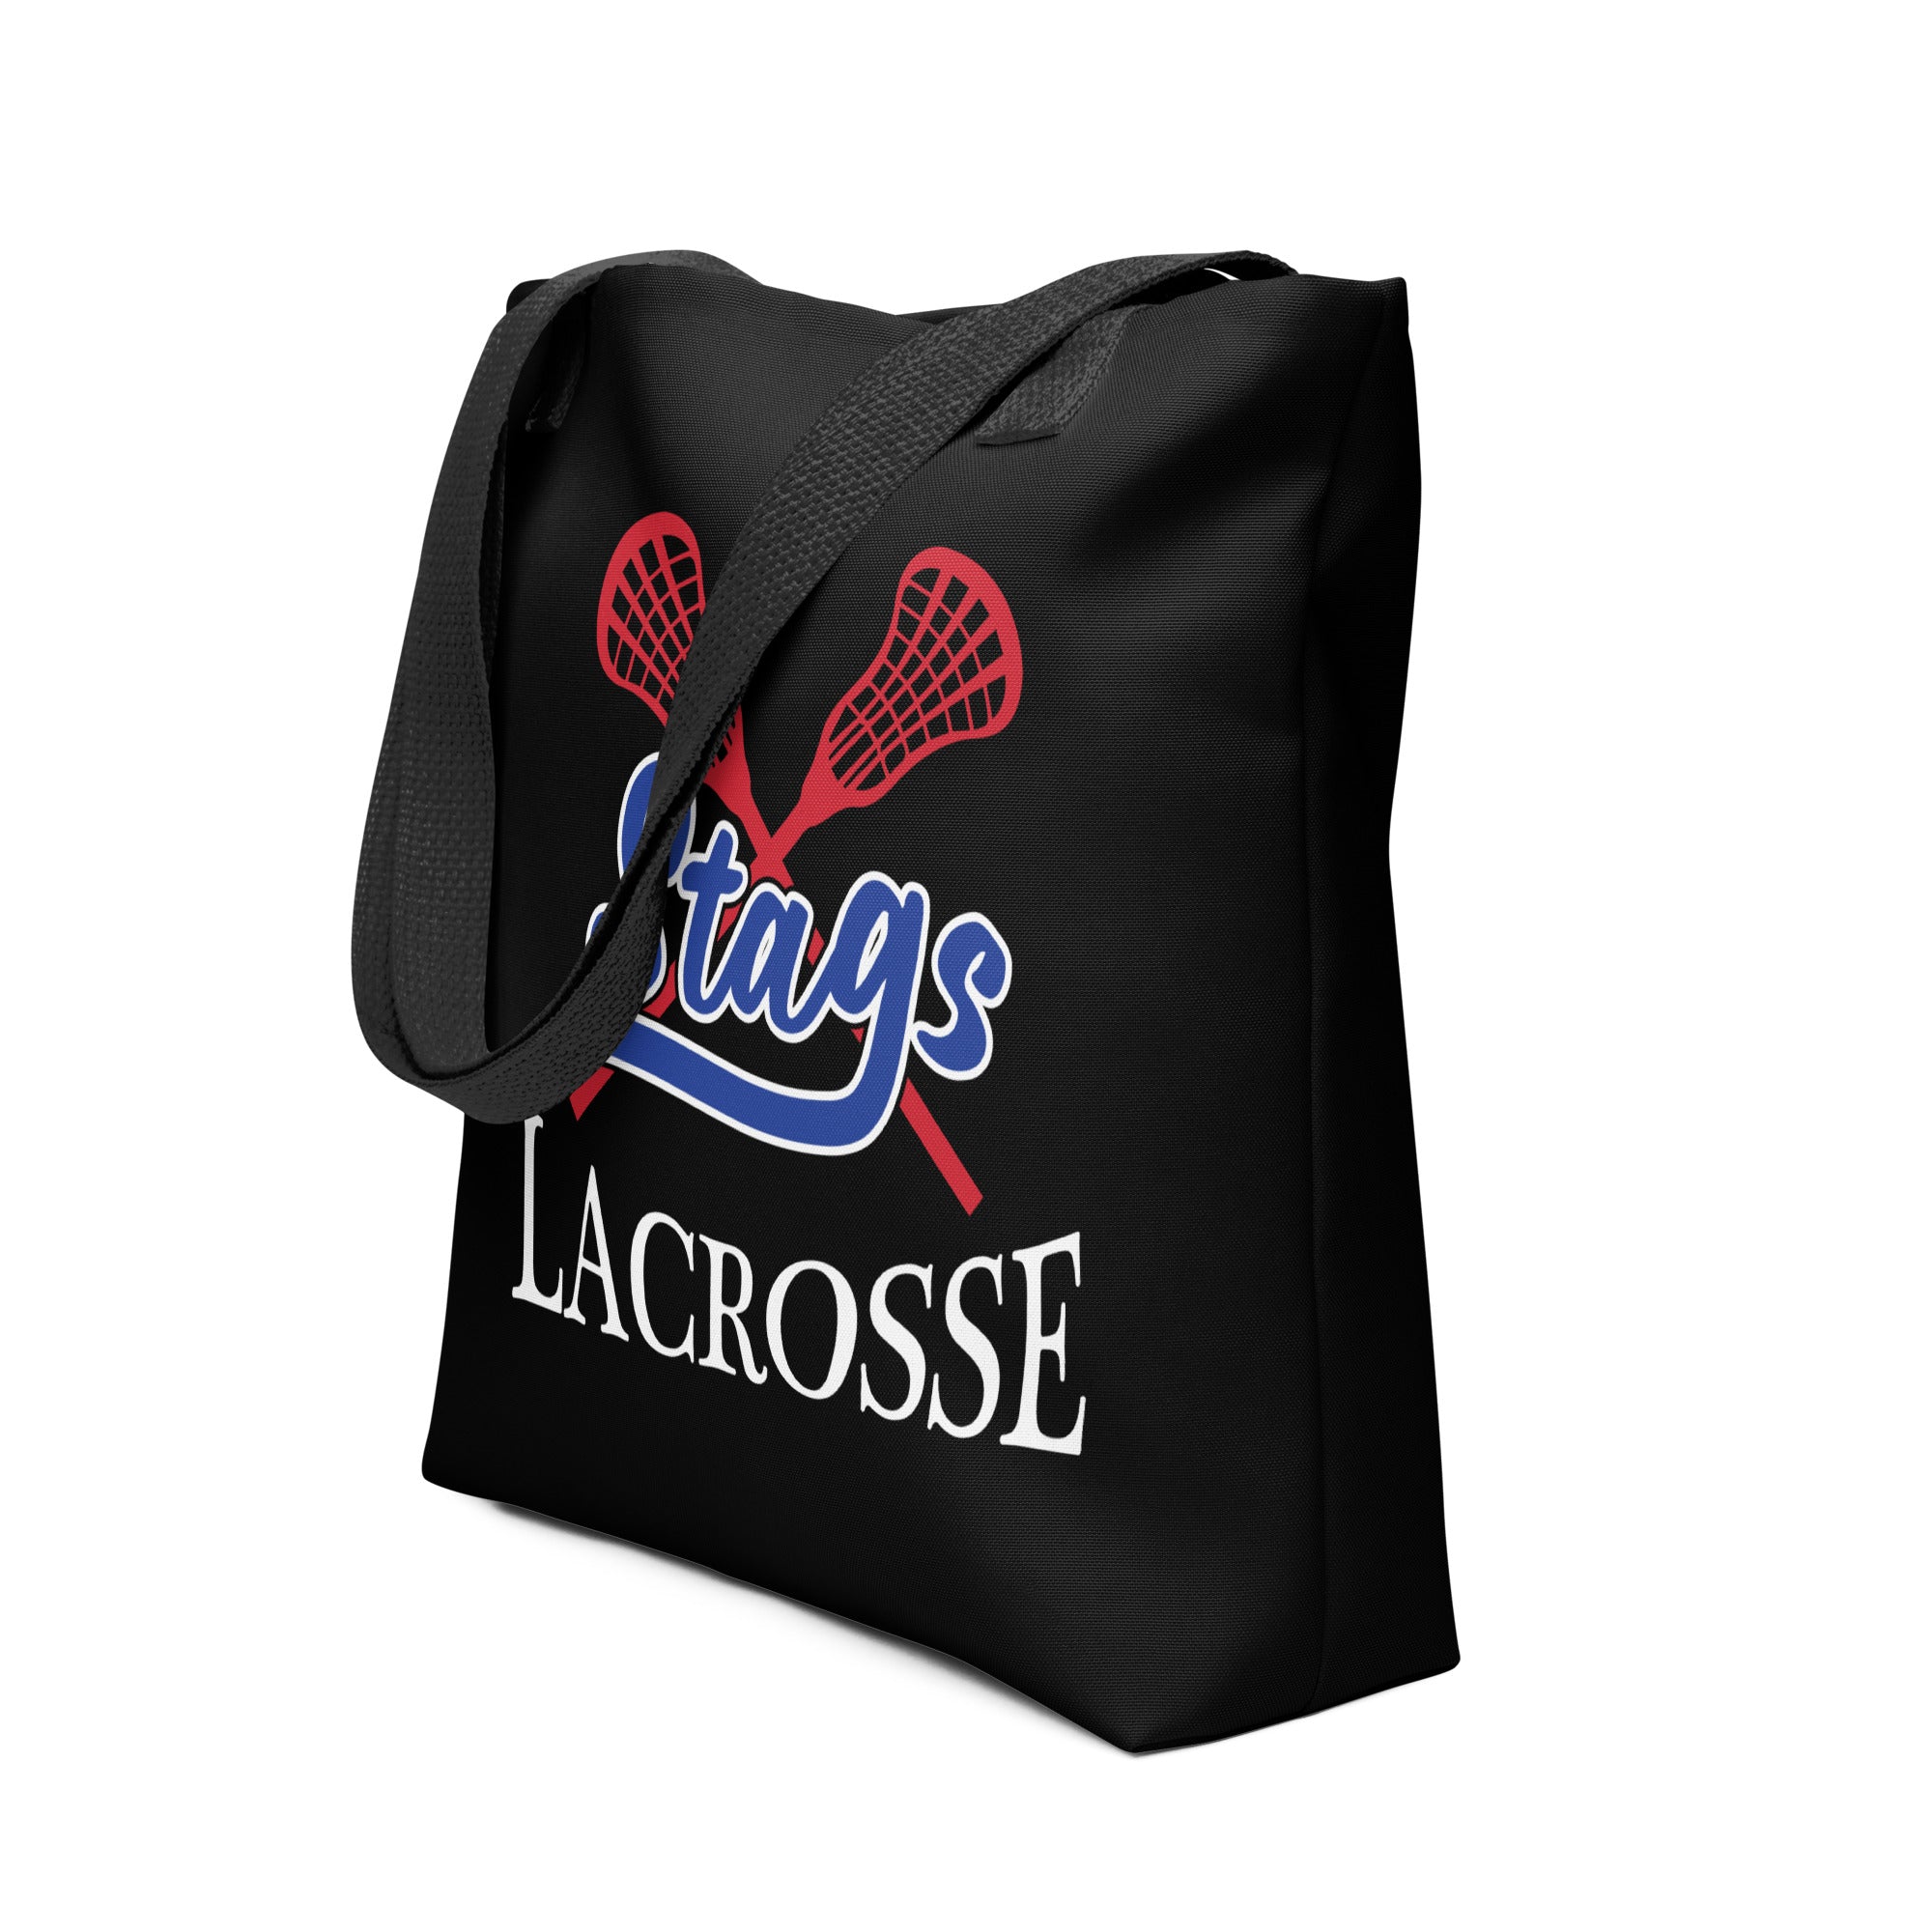 Stags Lacrosse All Over Print Tote